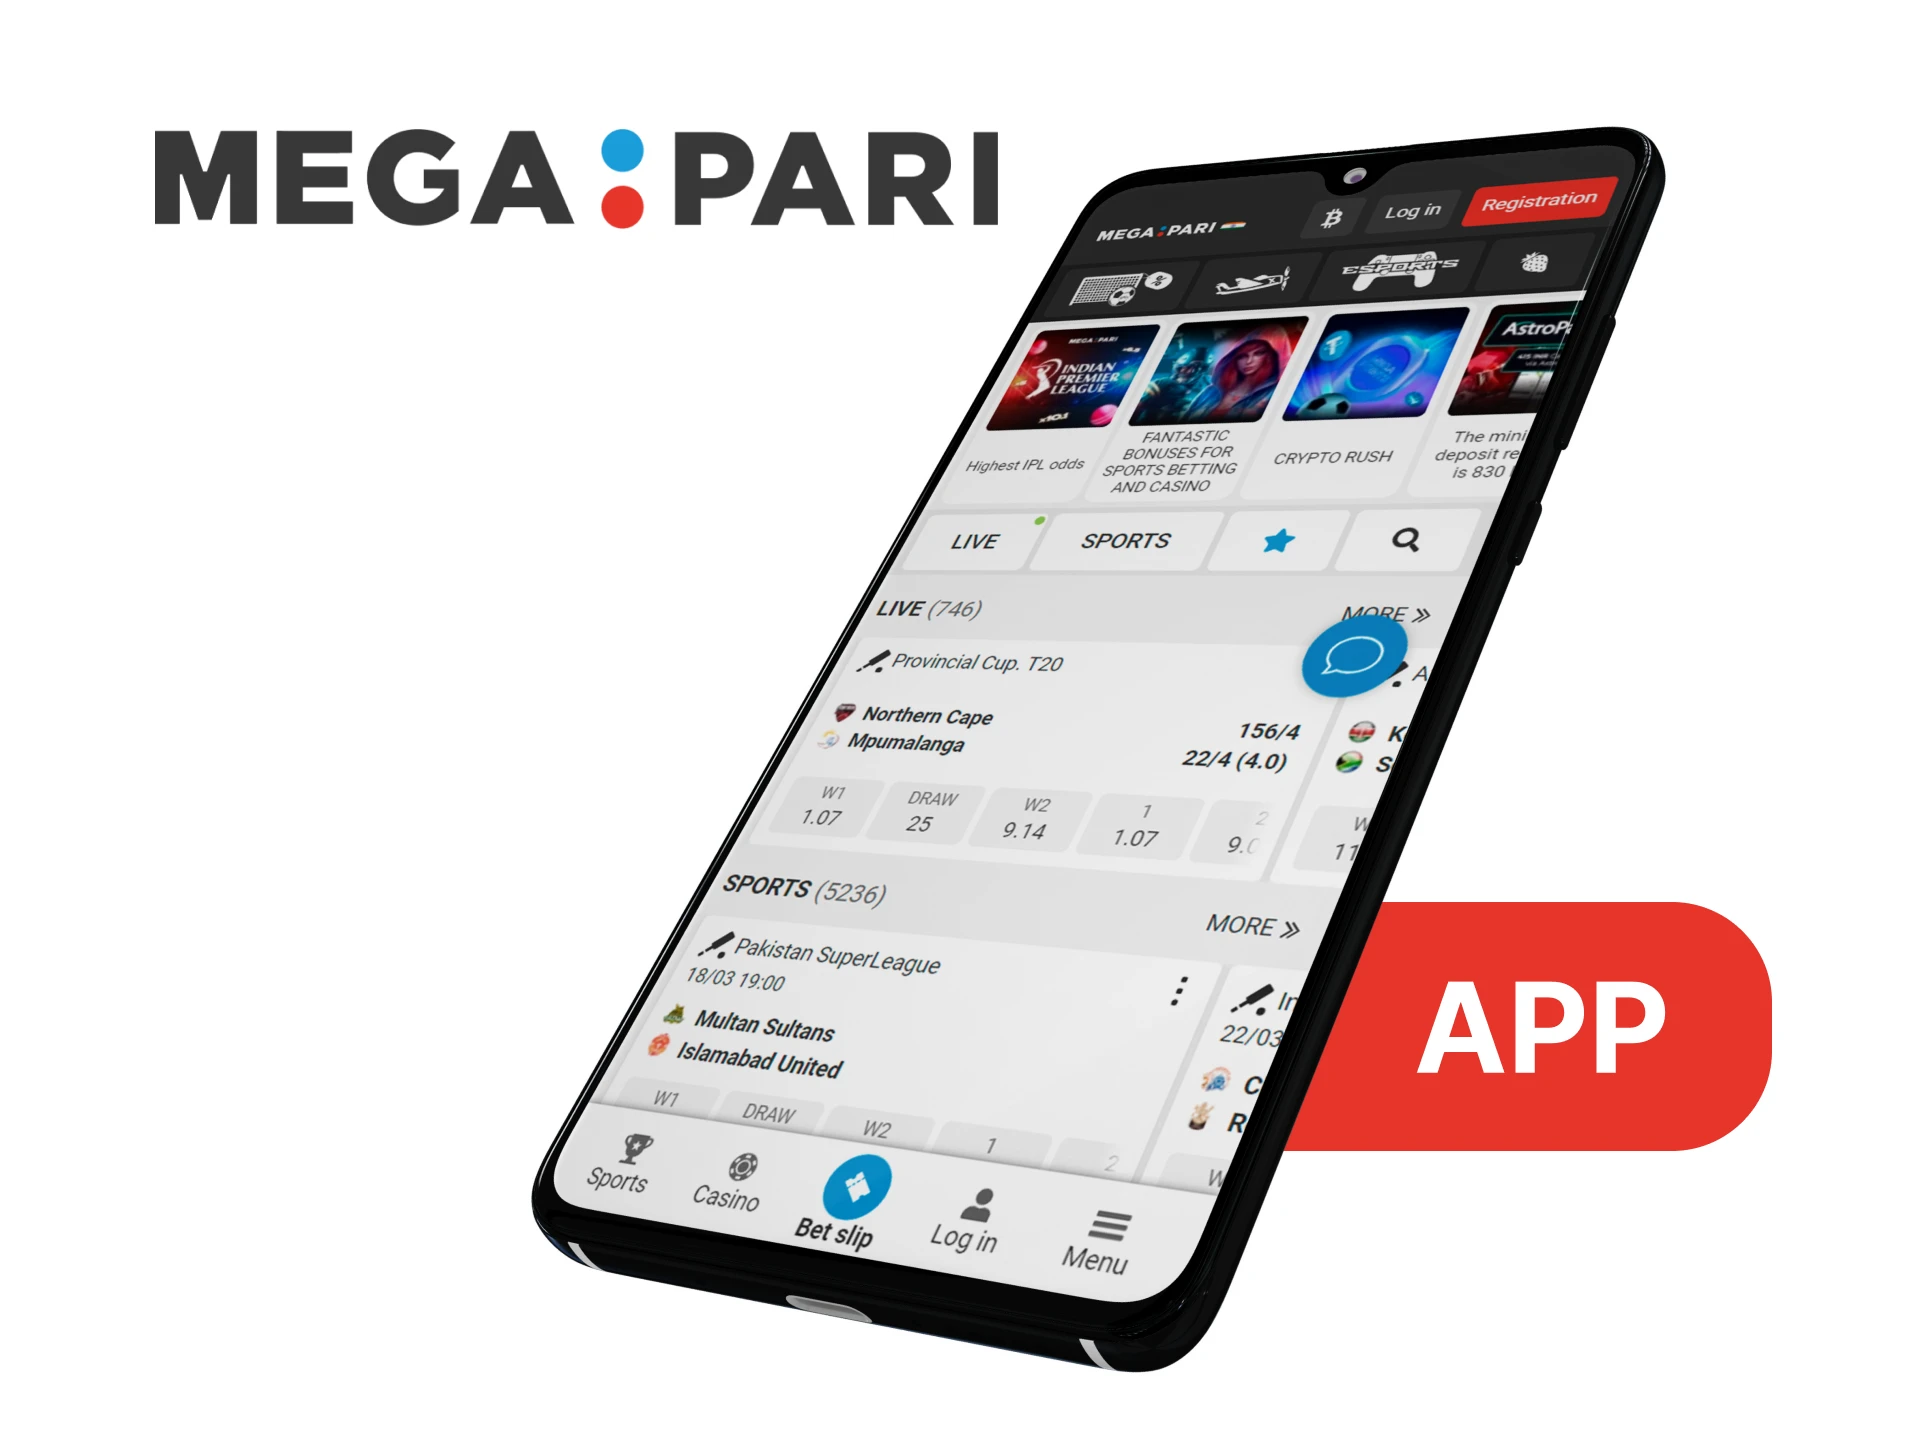 Download the Megapari app for betting on cricket and always be in the black.